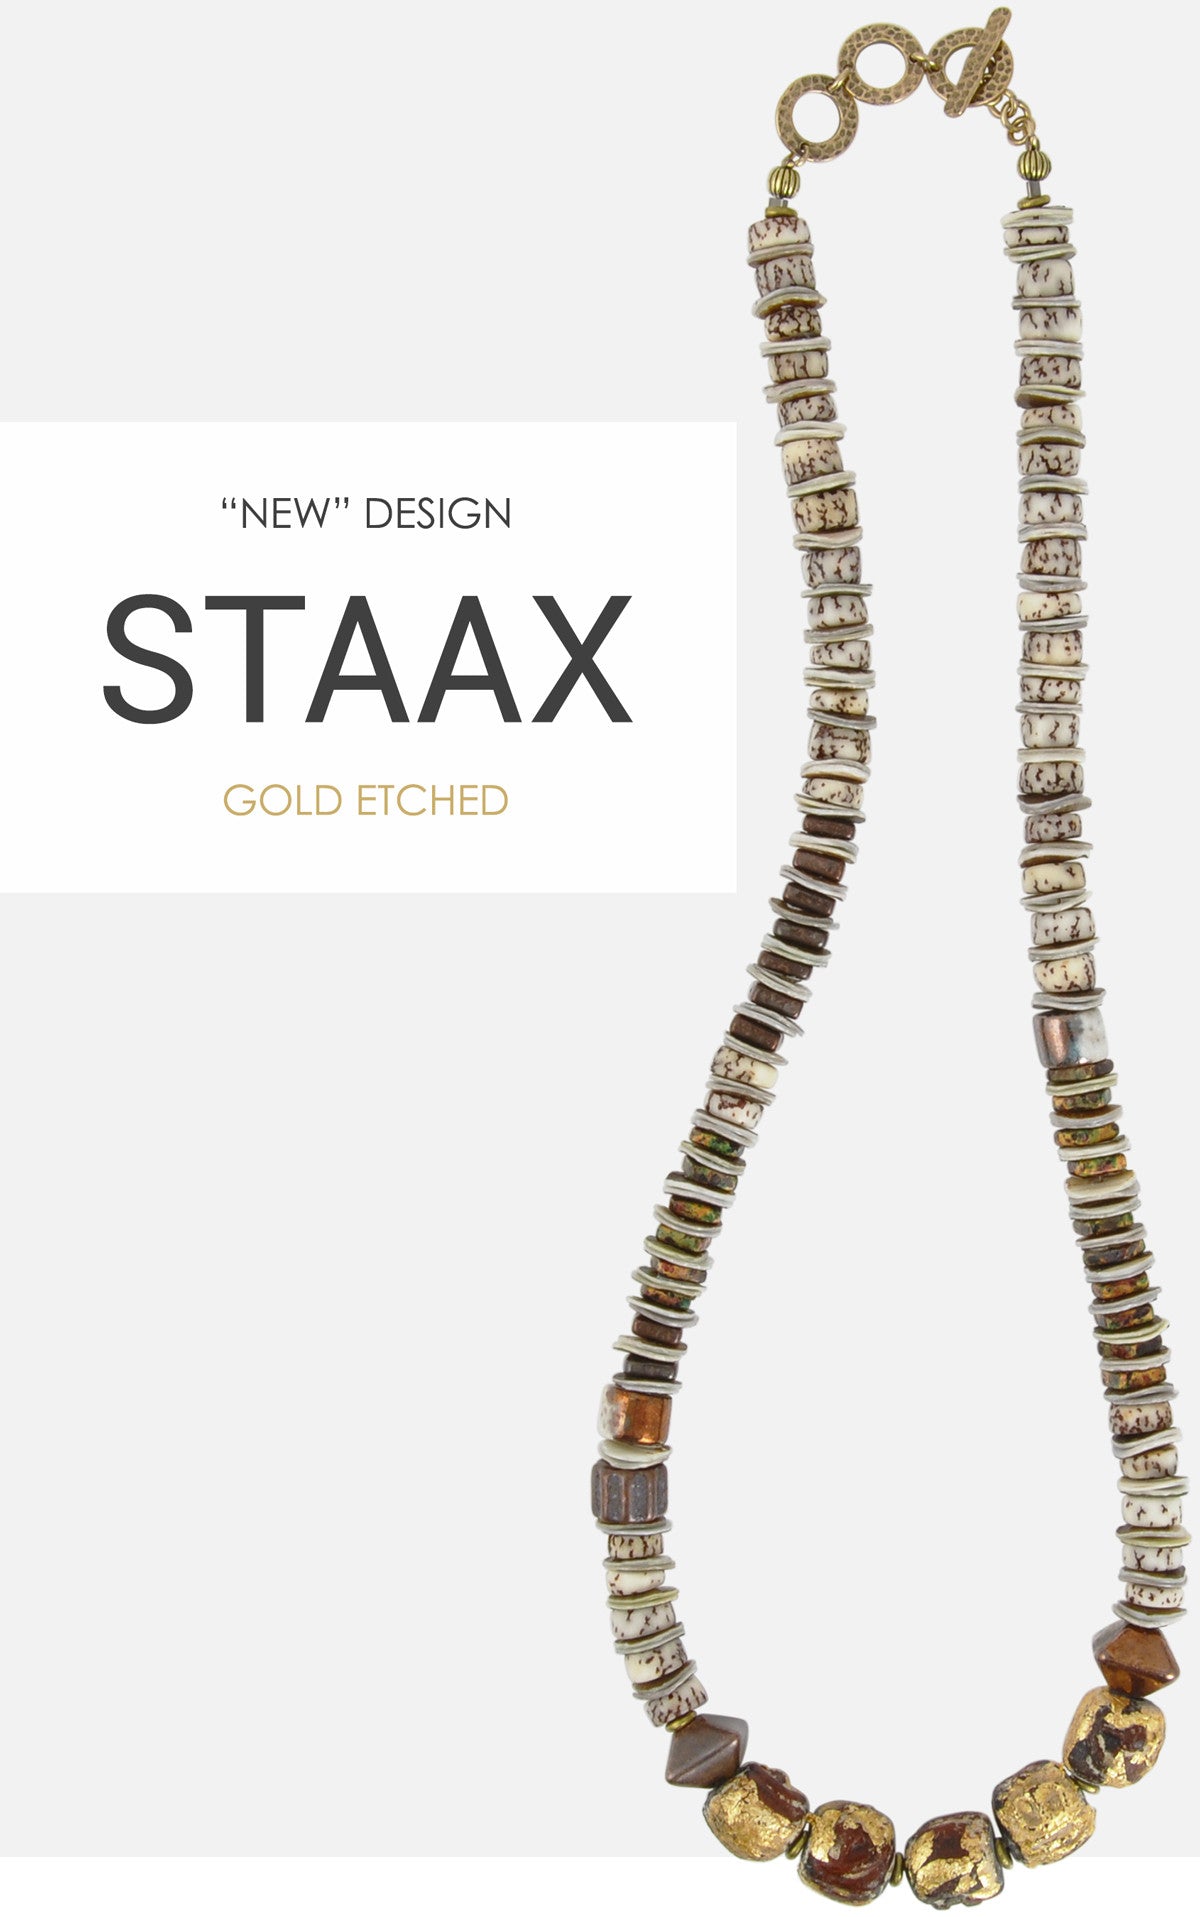 Staax Gold Etched Necklace Blog magdakaminska